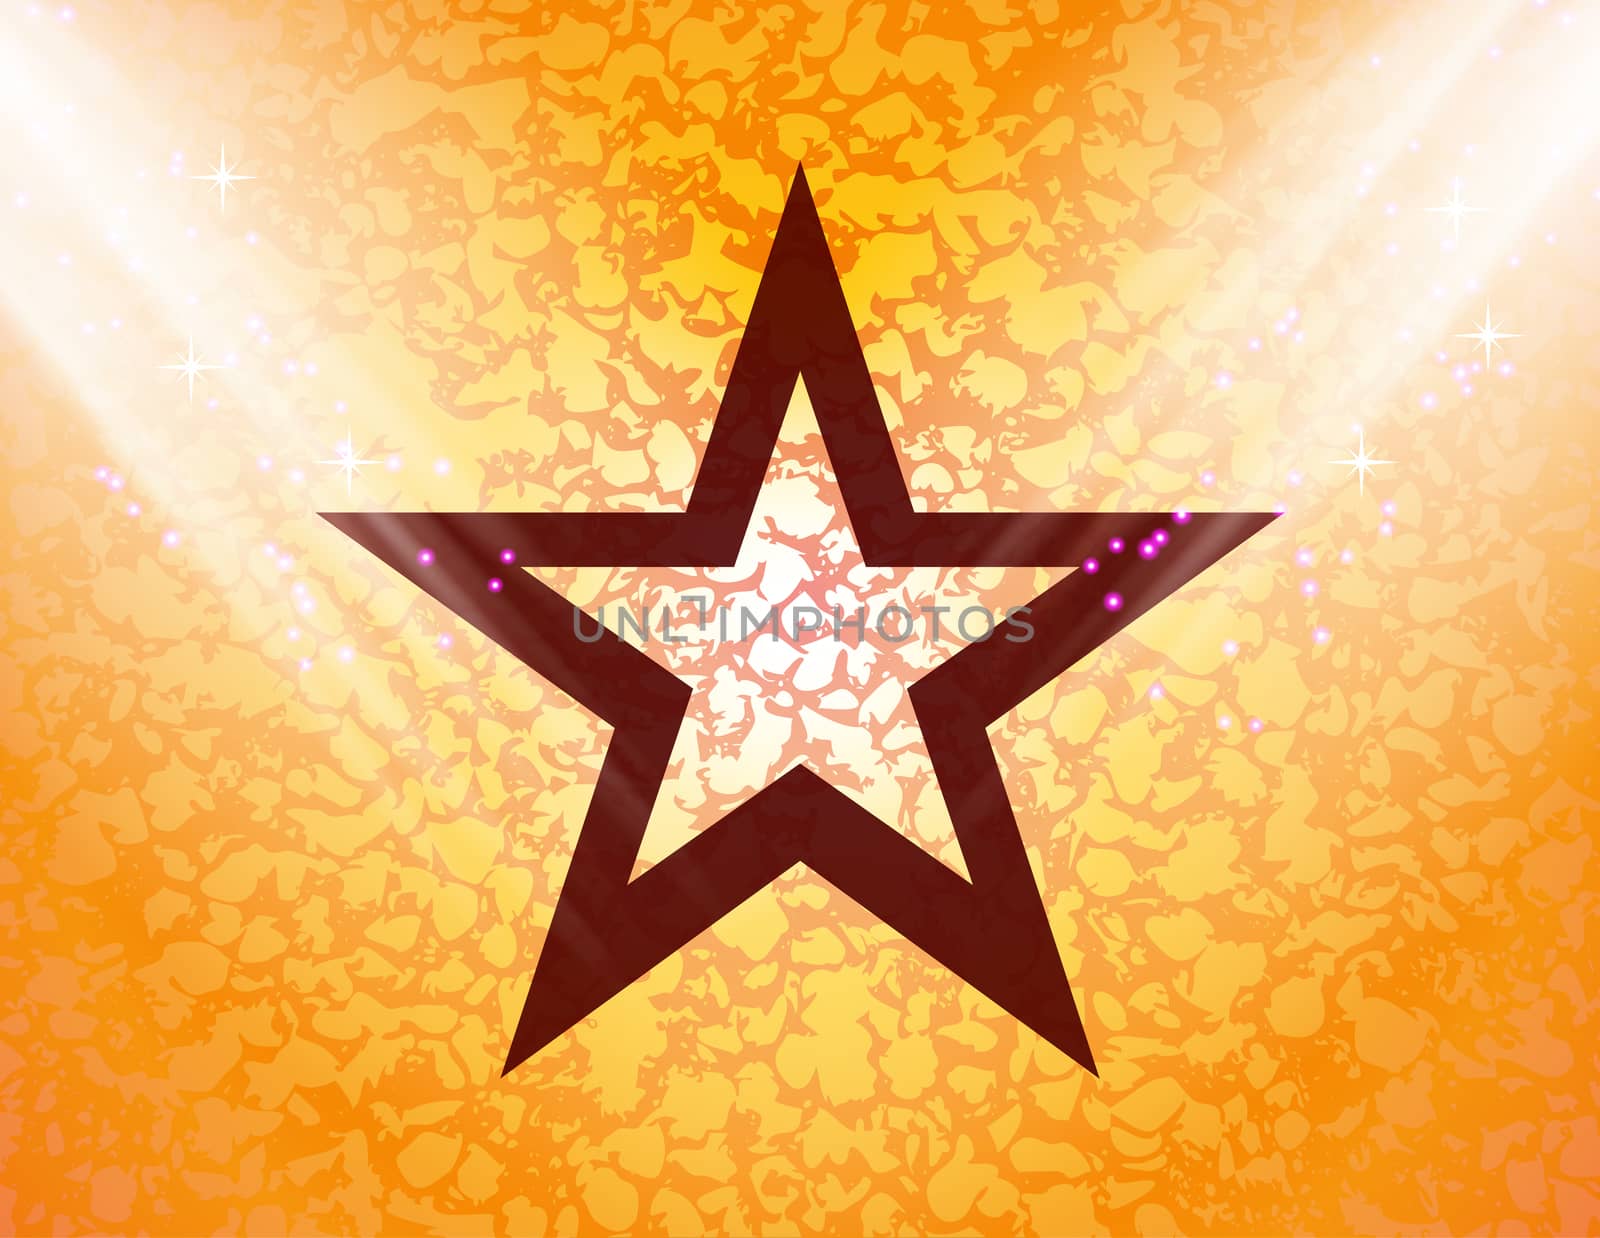 star flat design with abstract background.